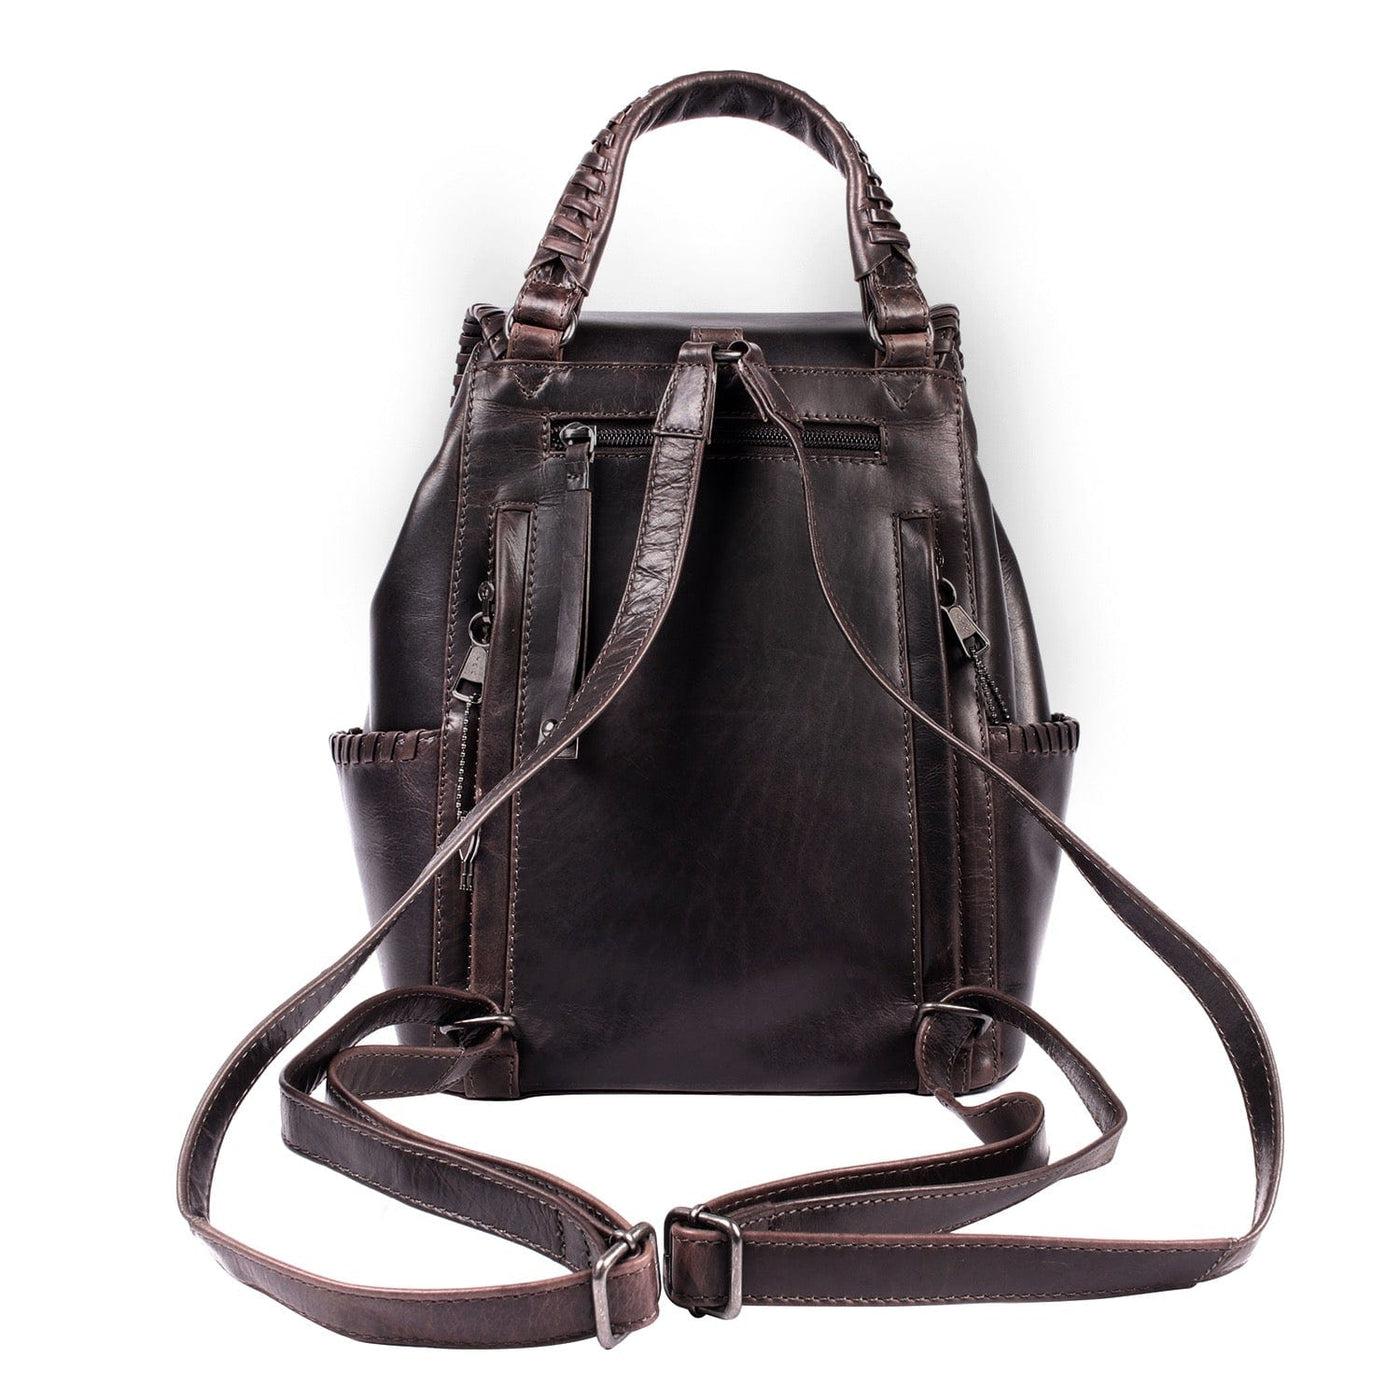 Concealed Carry Allie leather Backpack Black - Women's Concealed Carry Purse